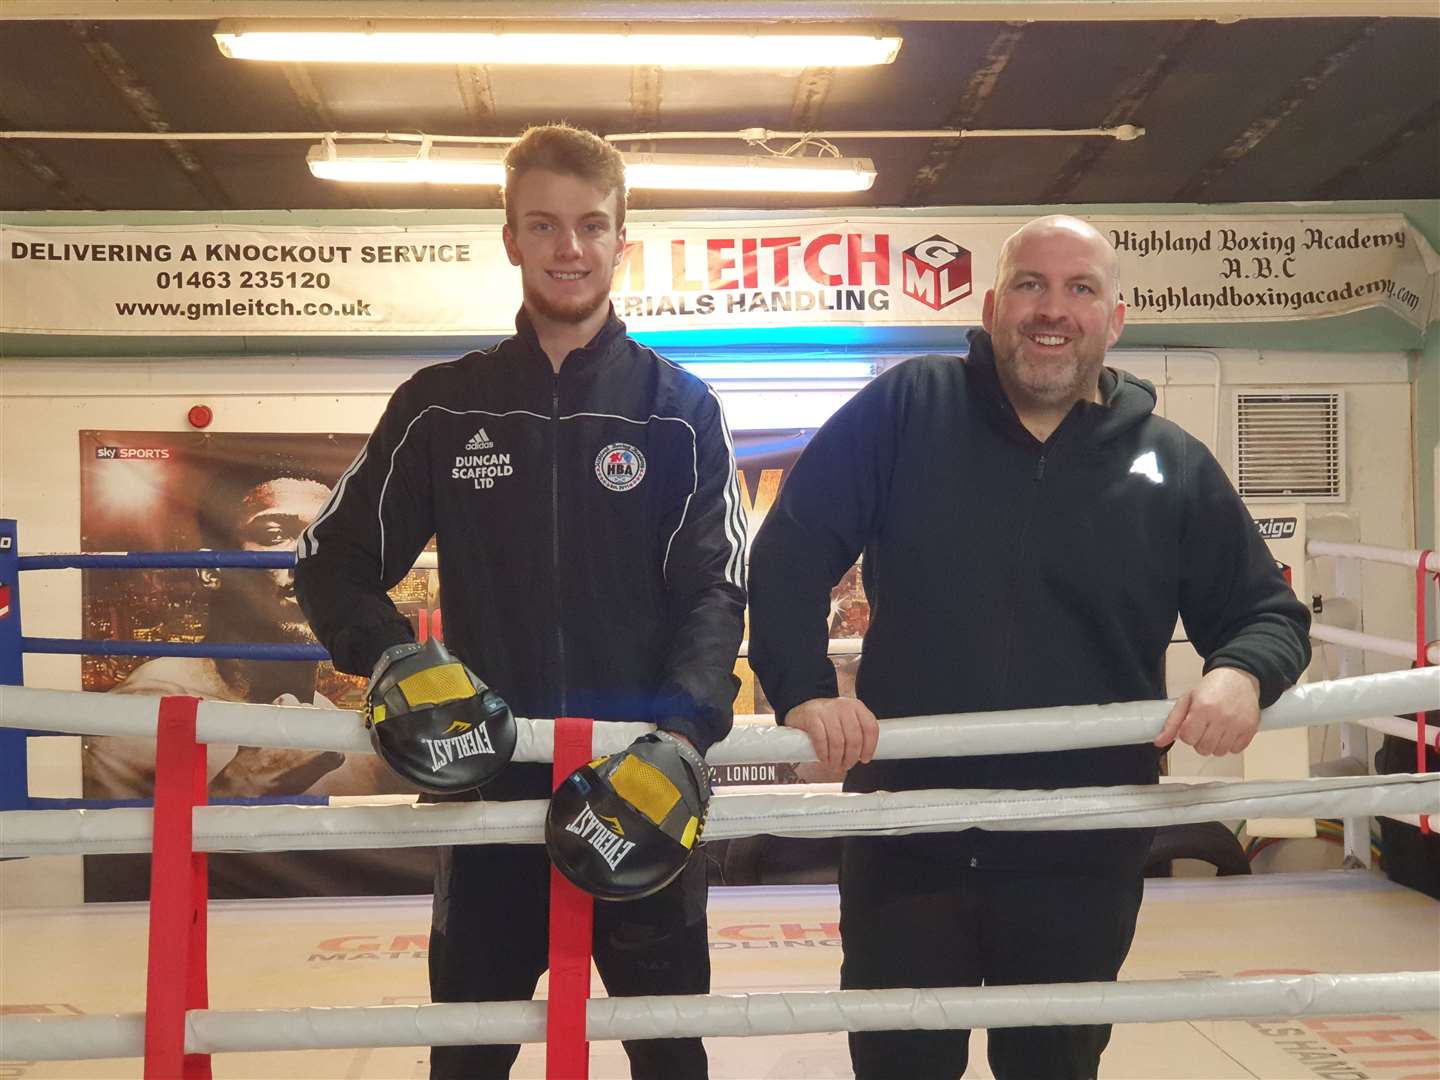 Levi Coyne has become a coach at Highland Boxing Academy after being forced to quit competing due to injury.